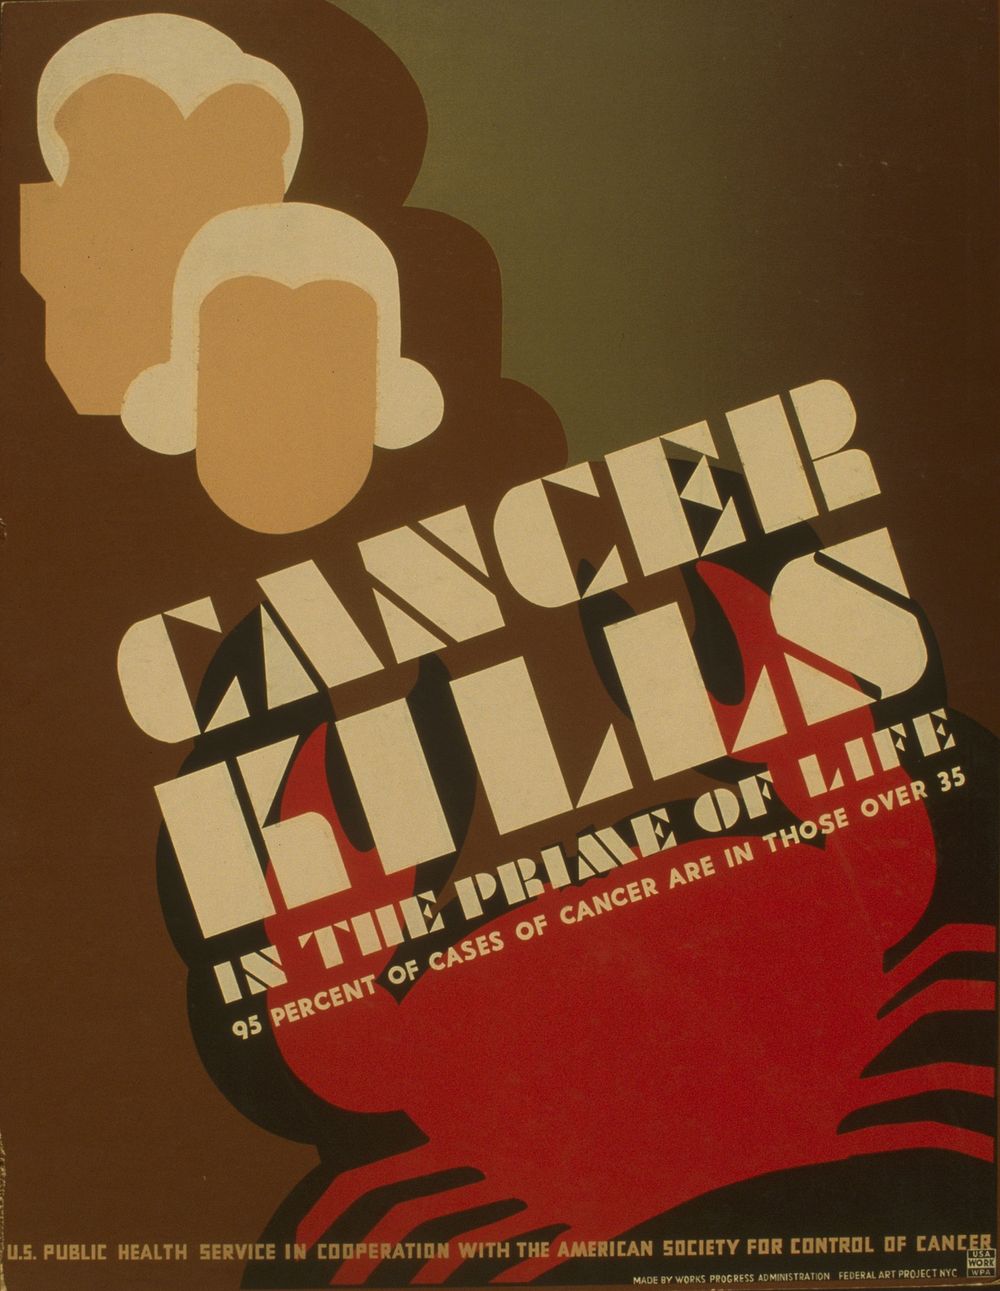 Cancer kills in the prime of life 95 percent of cases of cancer are in those over 35.